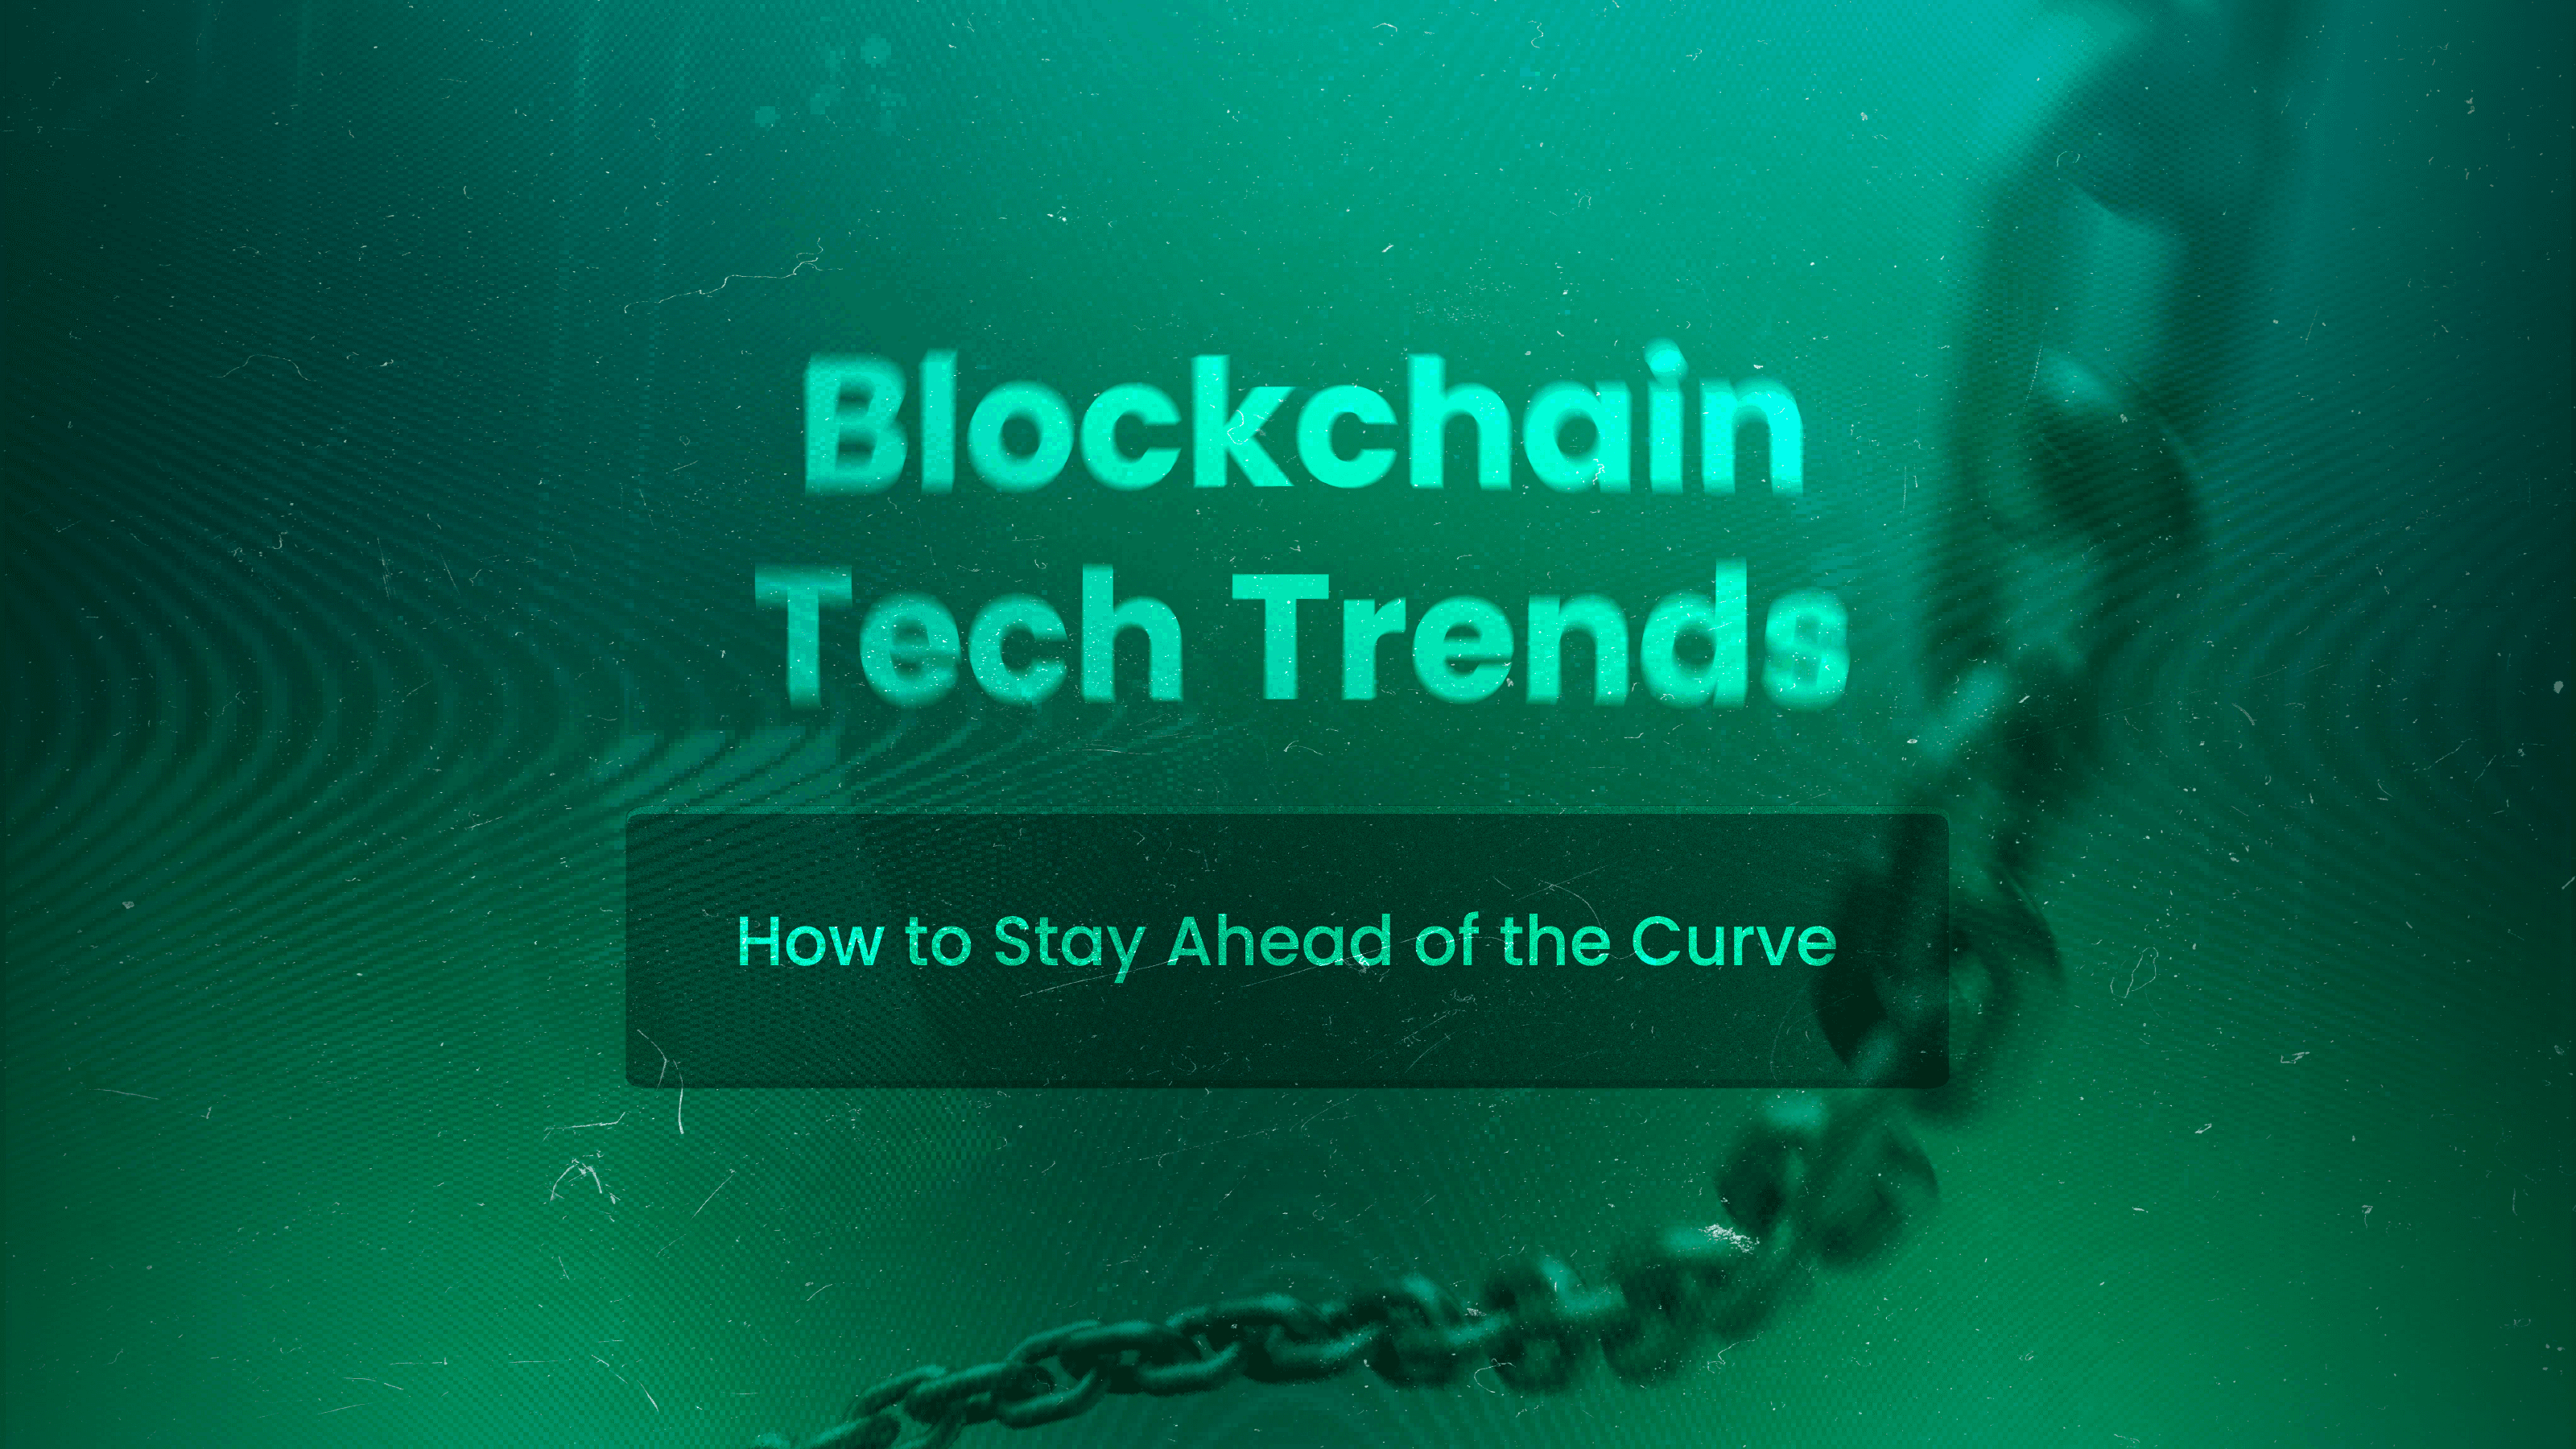 Blockchain Tech Trends: How to Stay Ahead of the Curve